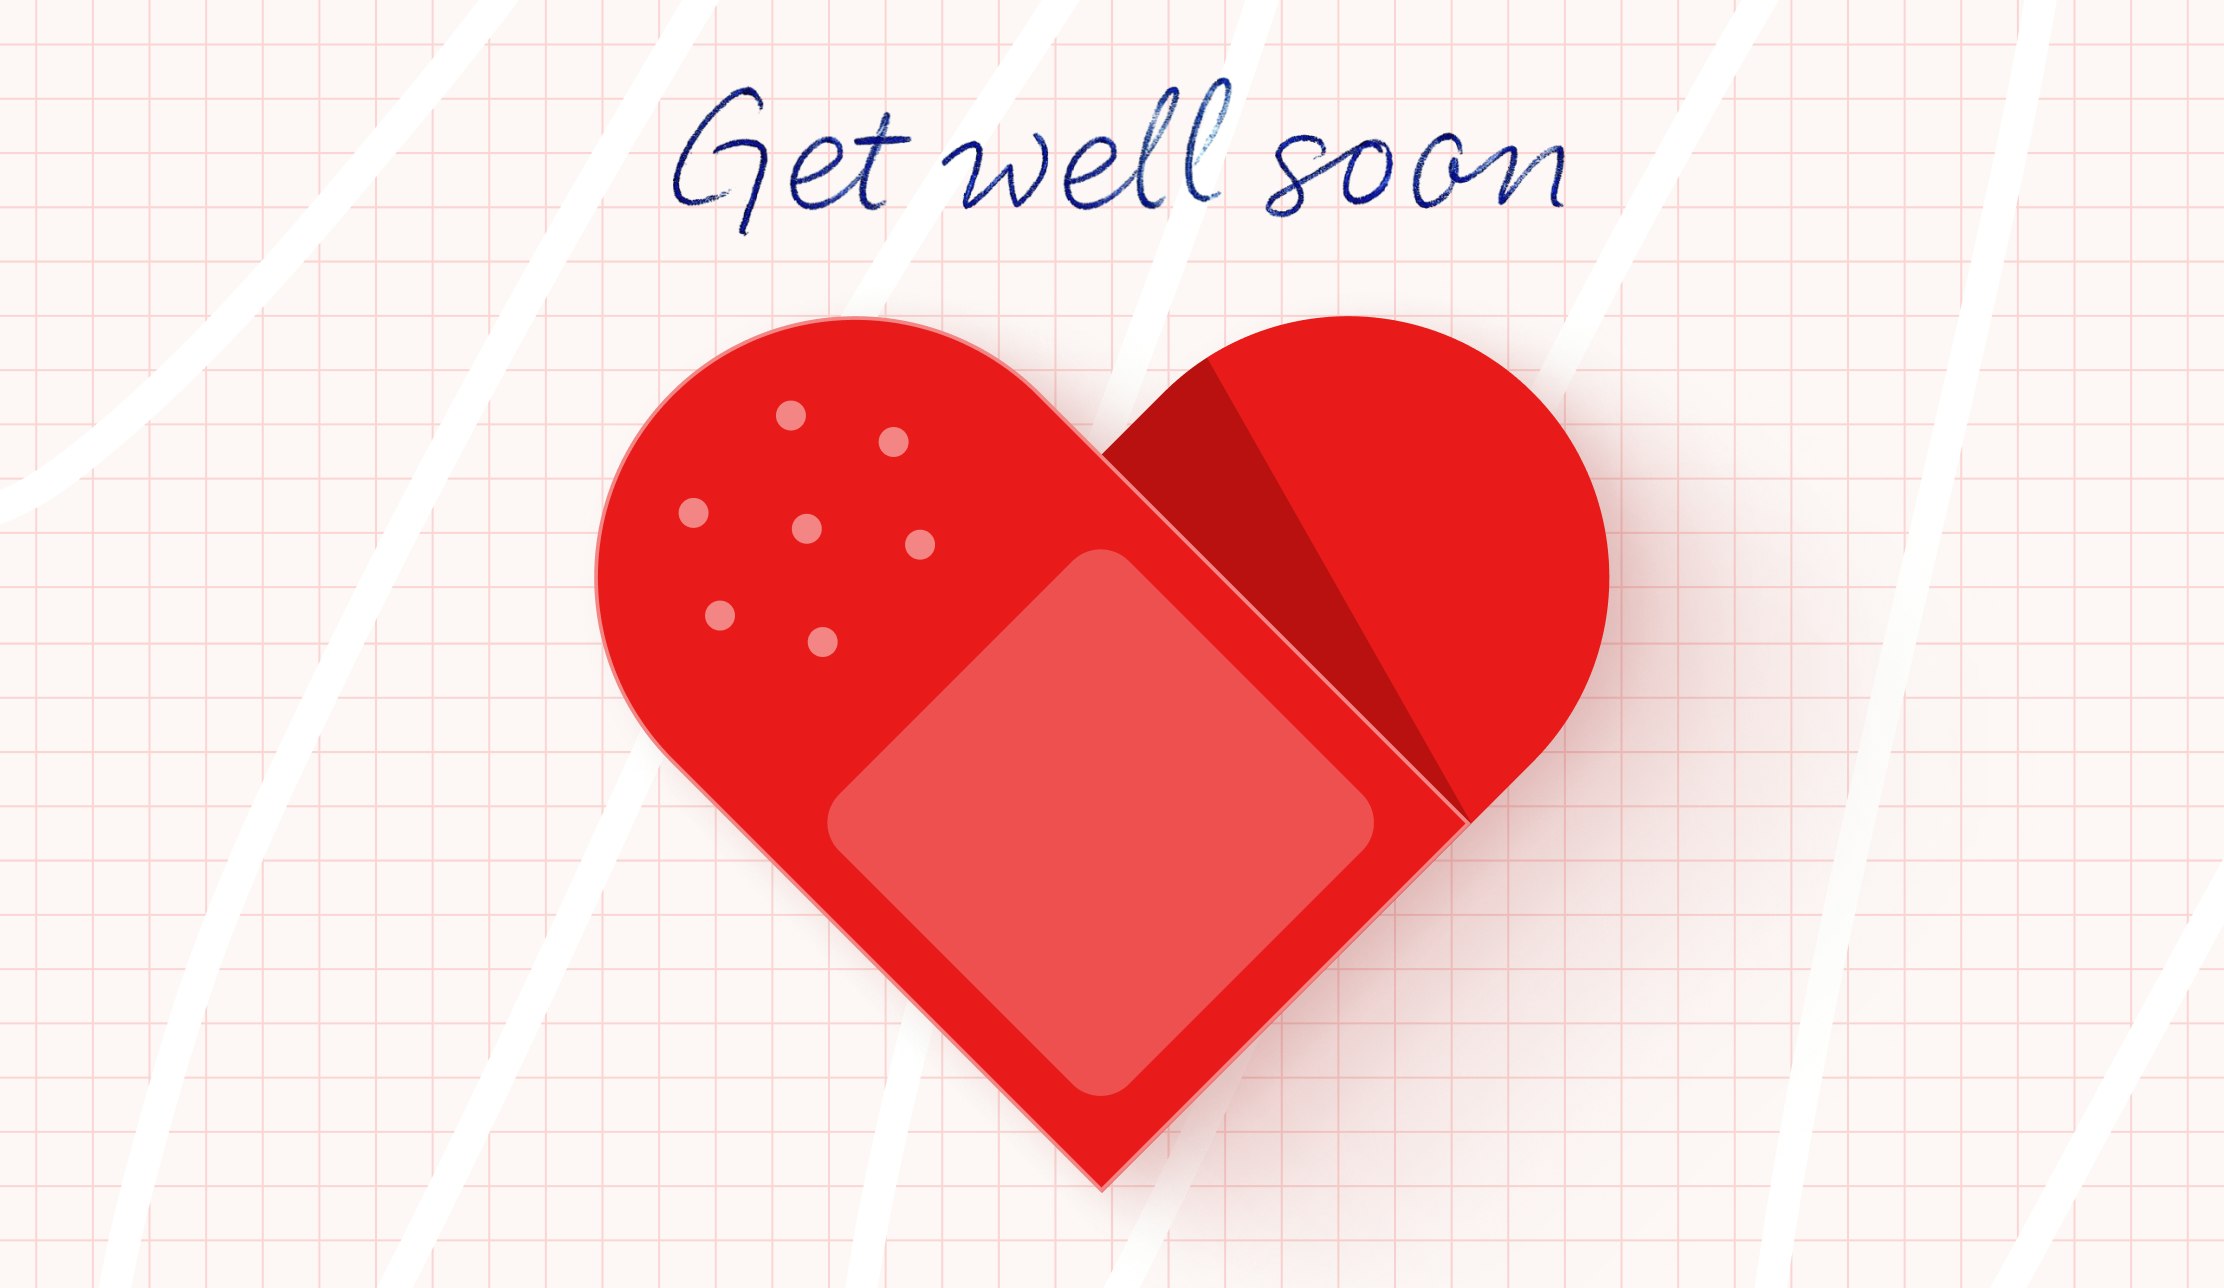 Get well soon text with heart made from sticking plasters